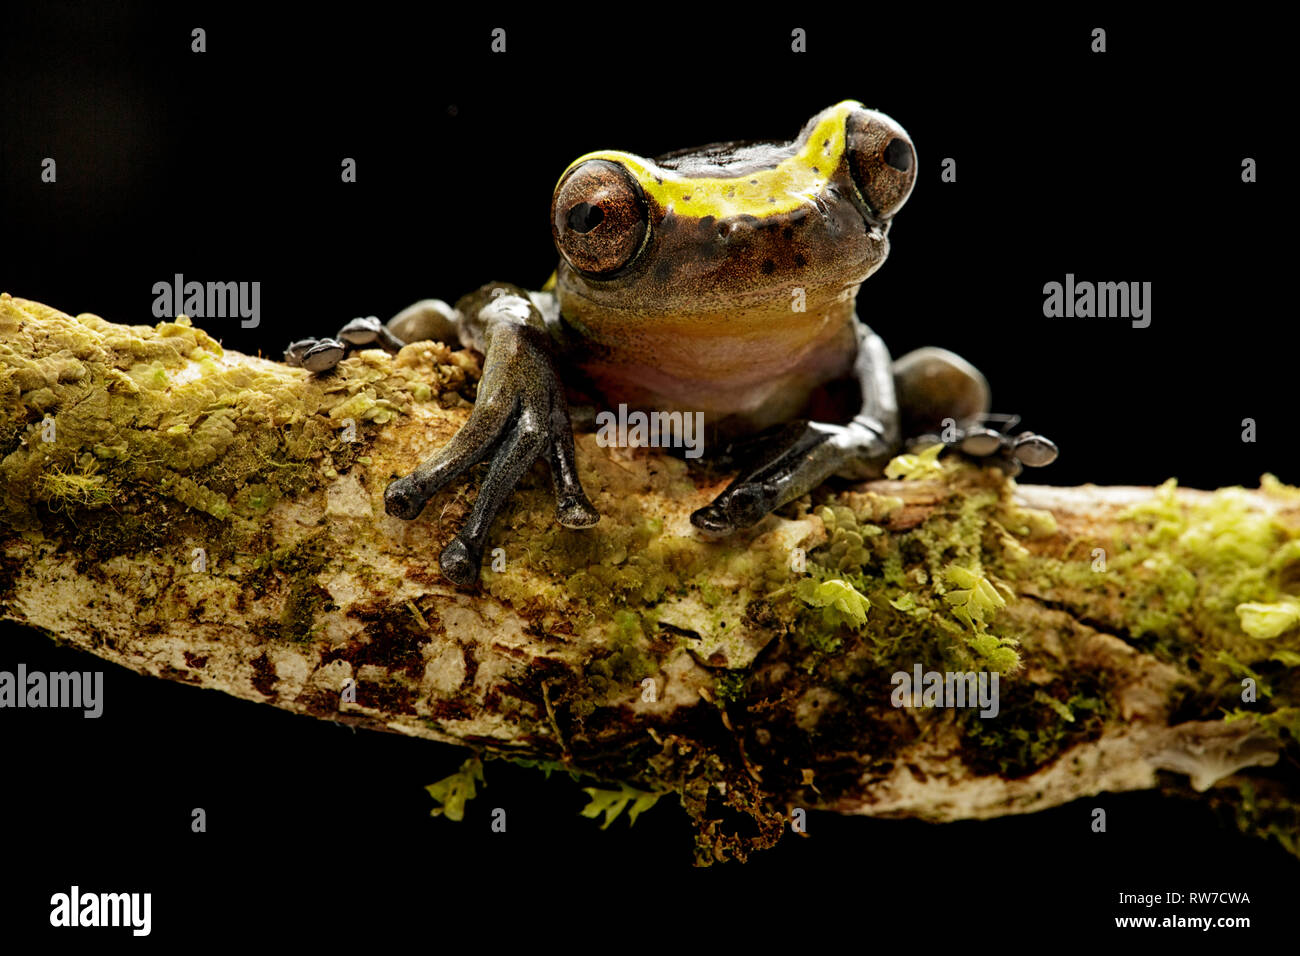 funny curious tree frog dendropsophus manonegra a small treefrog from the Amazon rain forest in Colombia A nocturnal jungle animal. Stock Photo